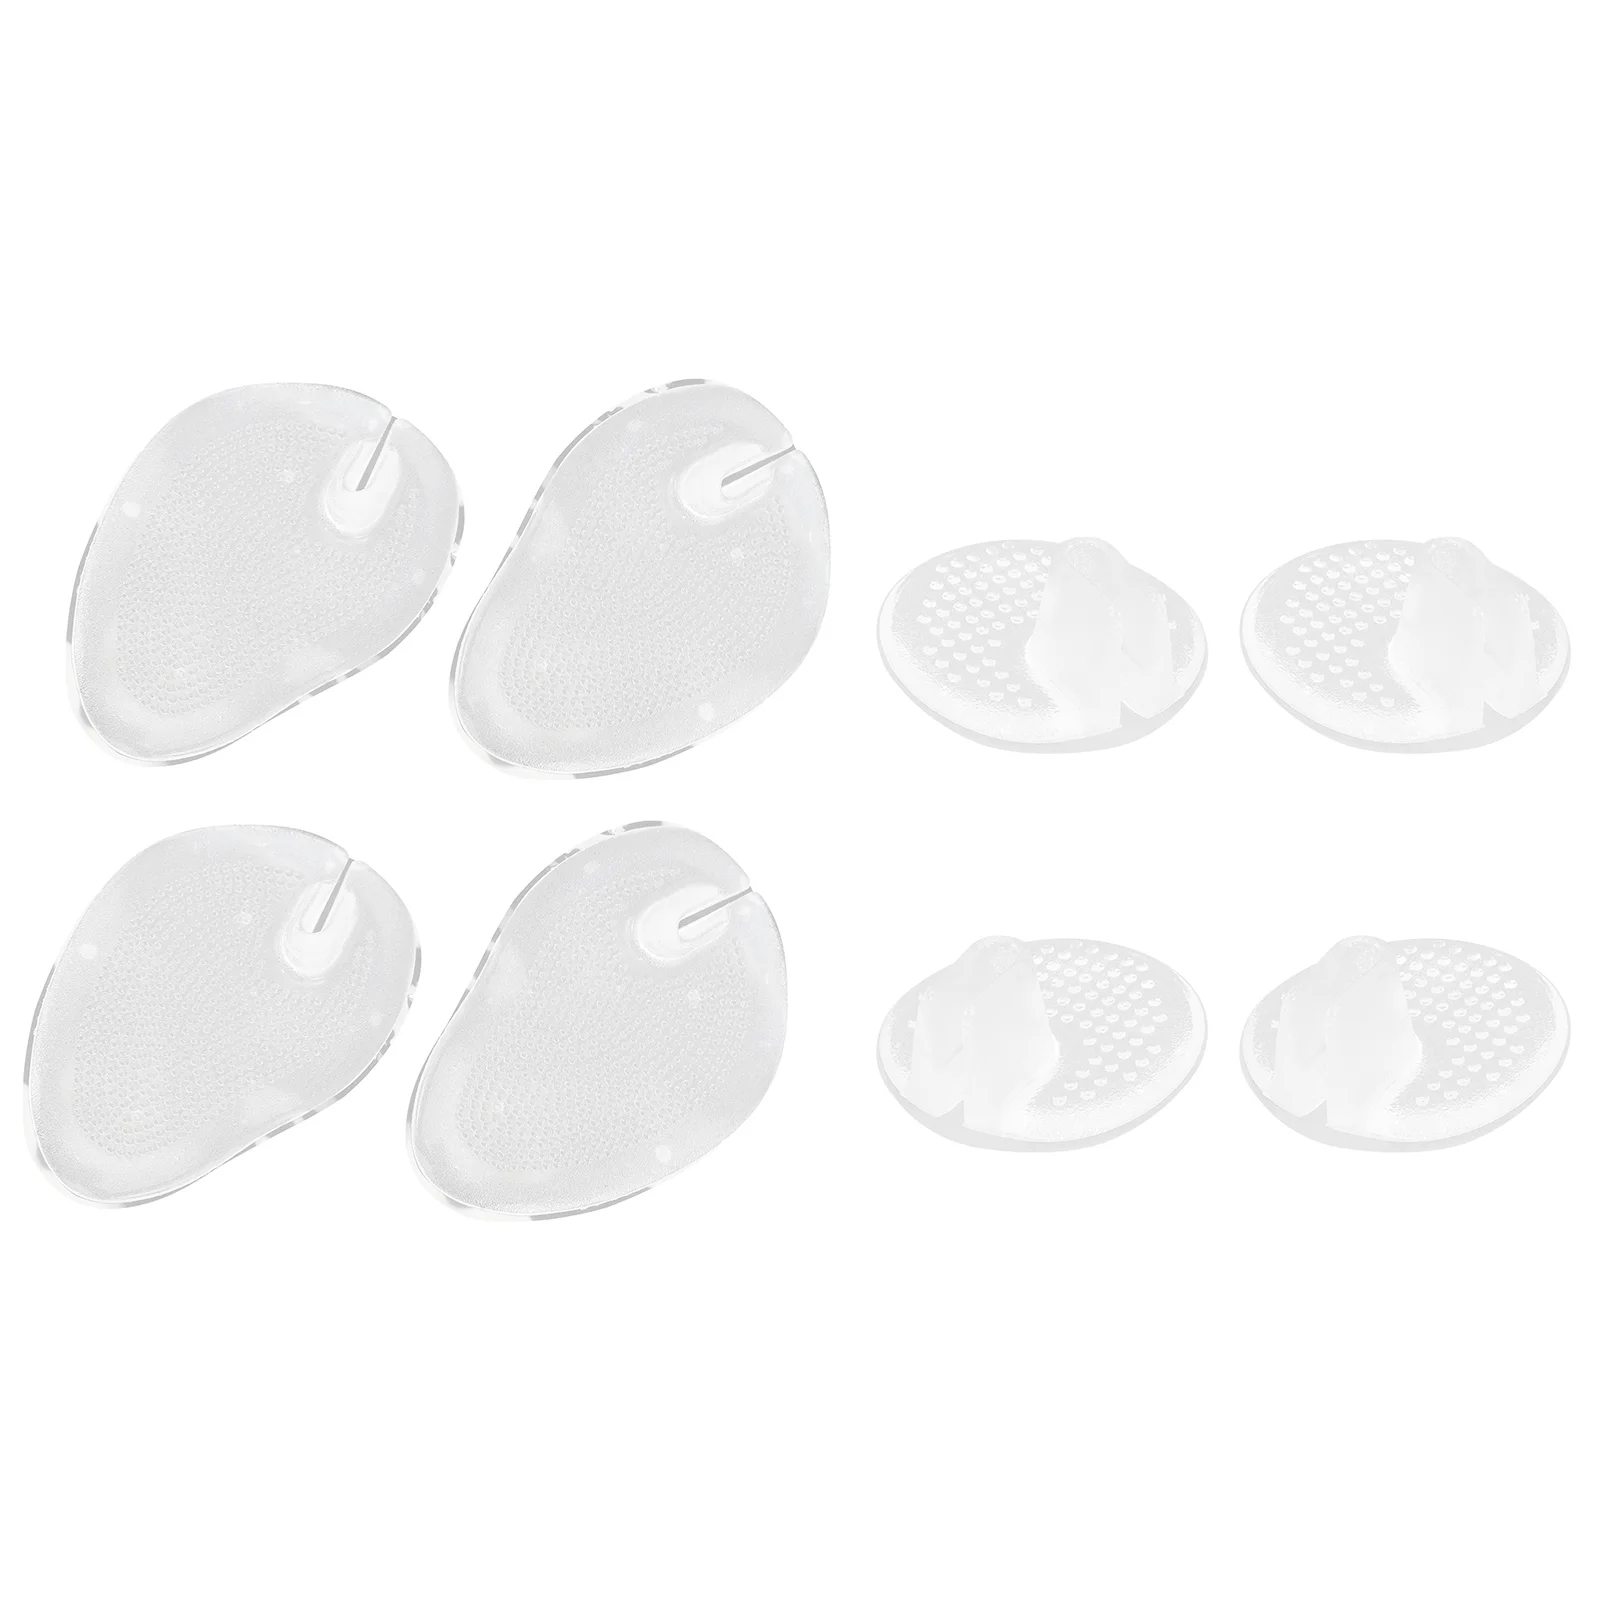 4 Pairs Thong Sandal Clear Thong Sandal Thong Sandal Toe Pads Silicone Forefoot Cushions Clear Toe Grip Pads 1 pair non slip thick ultra soft forefoot cushions invisible foot pad sandal thong protectors bottom of the foot guards cushions